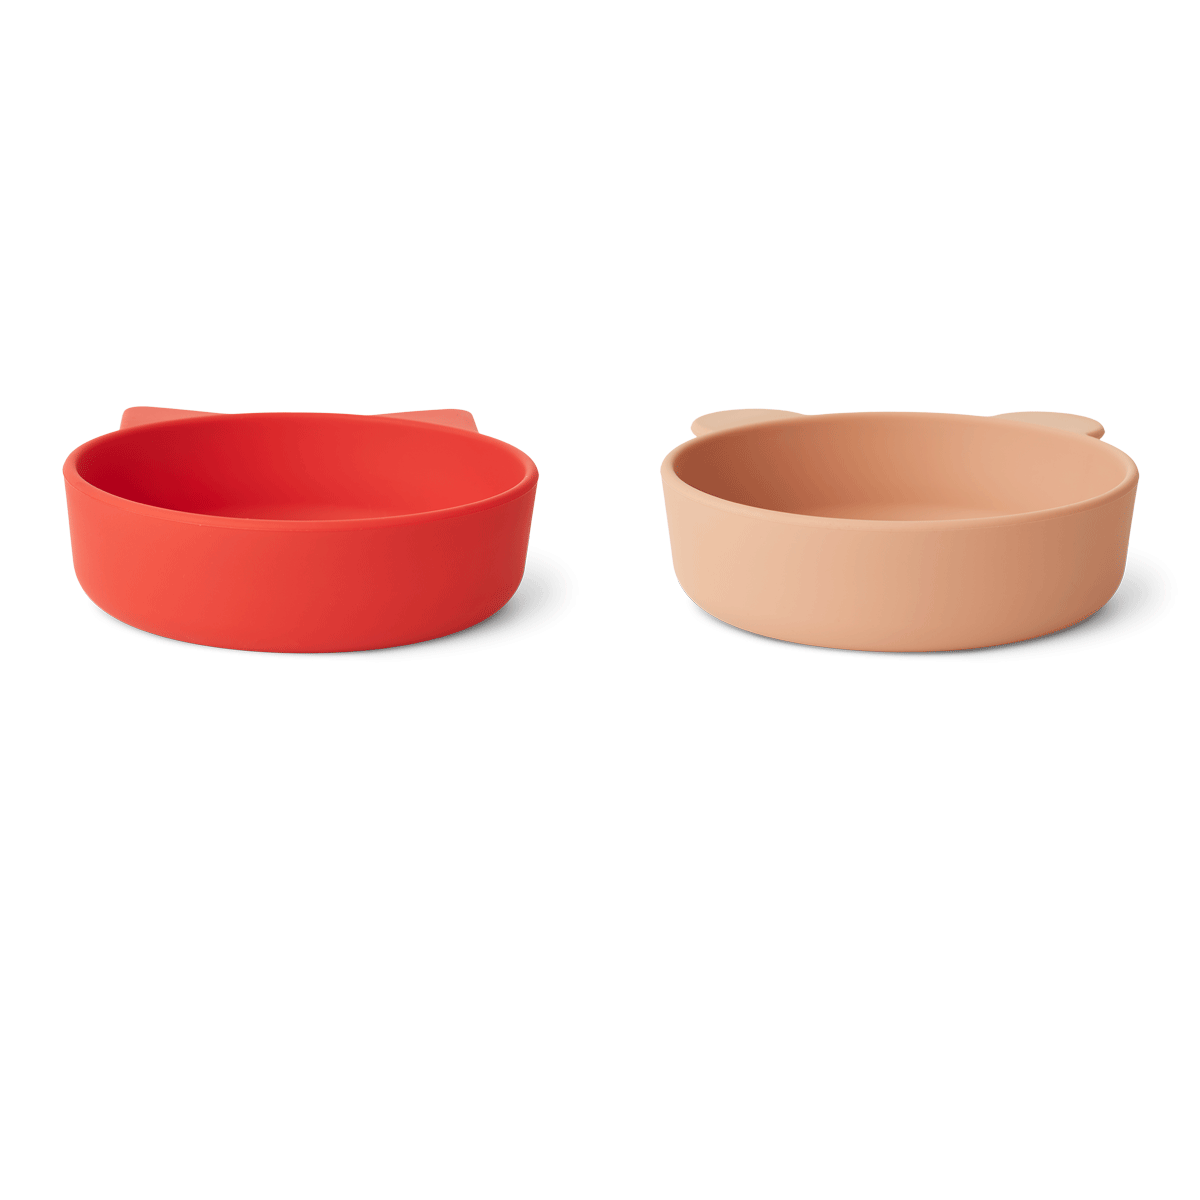 Liewood Vanessa Bowl 2 Pack - Apple red/tuscany rose mix